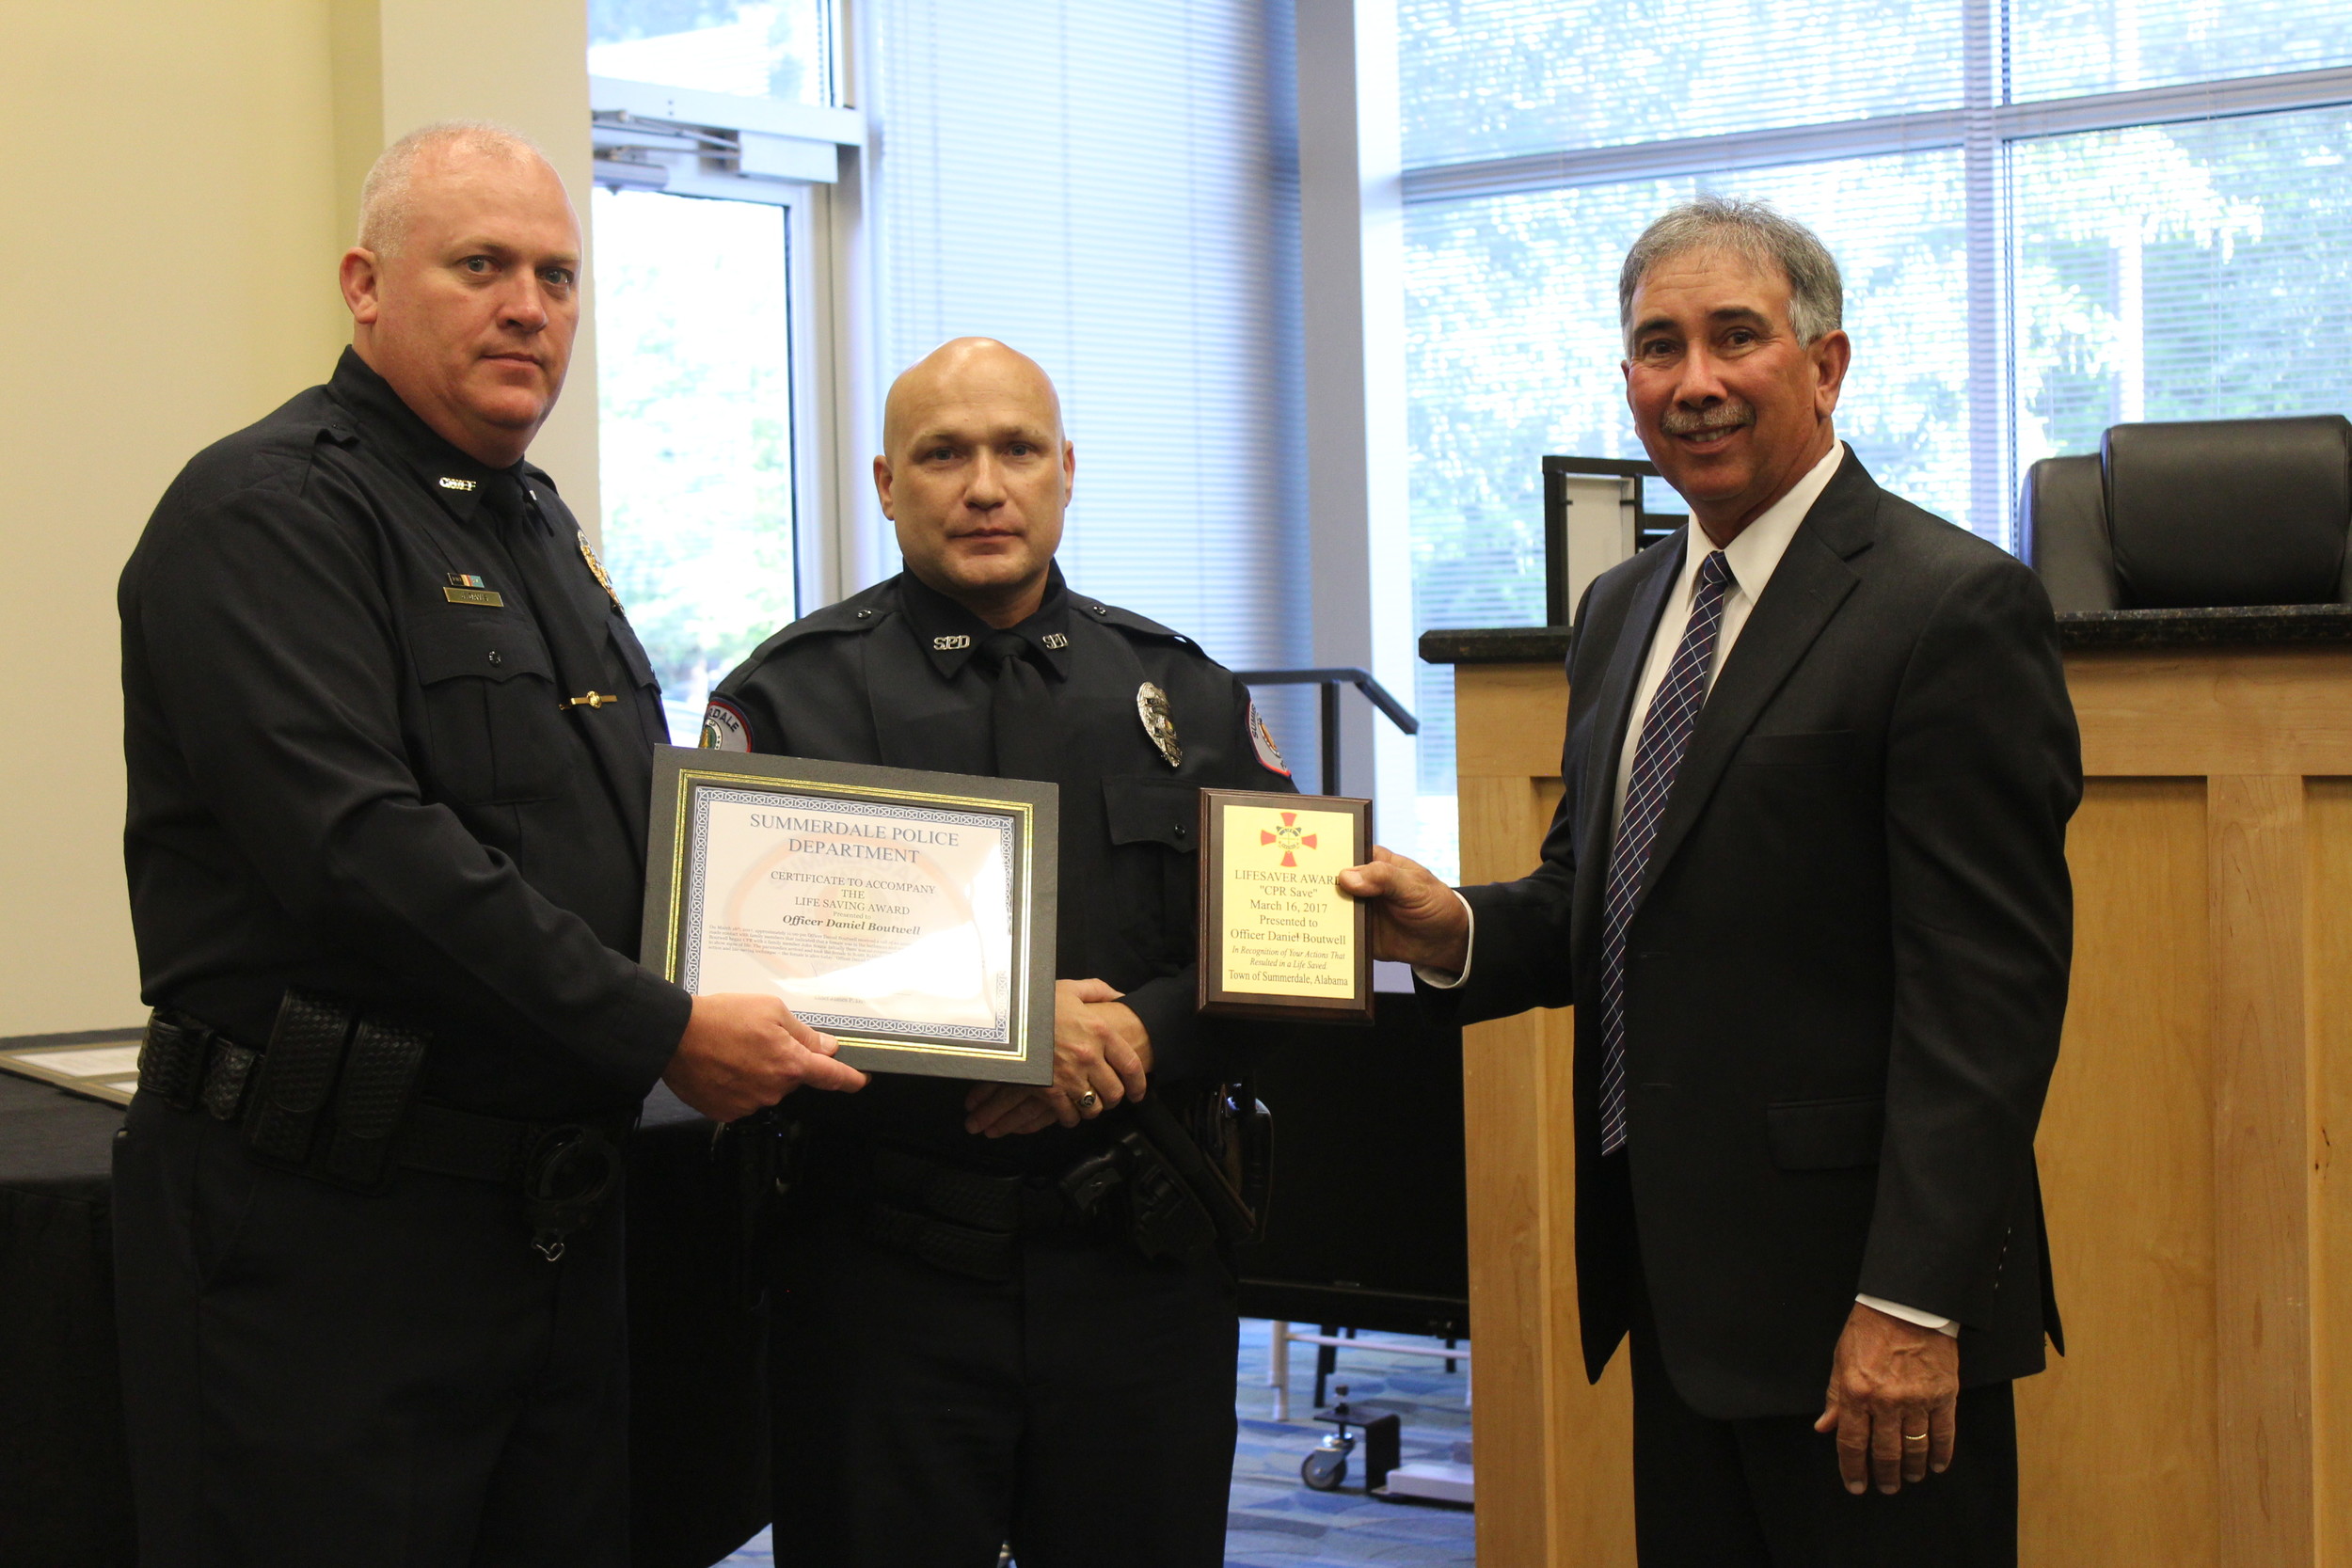 Officer Daniel Boutwell with the Summerdale Police Department received one of three lifesaving awards at the Summerdale Town Council meeting on April 10.